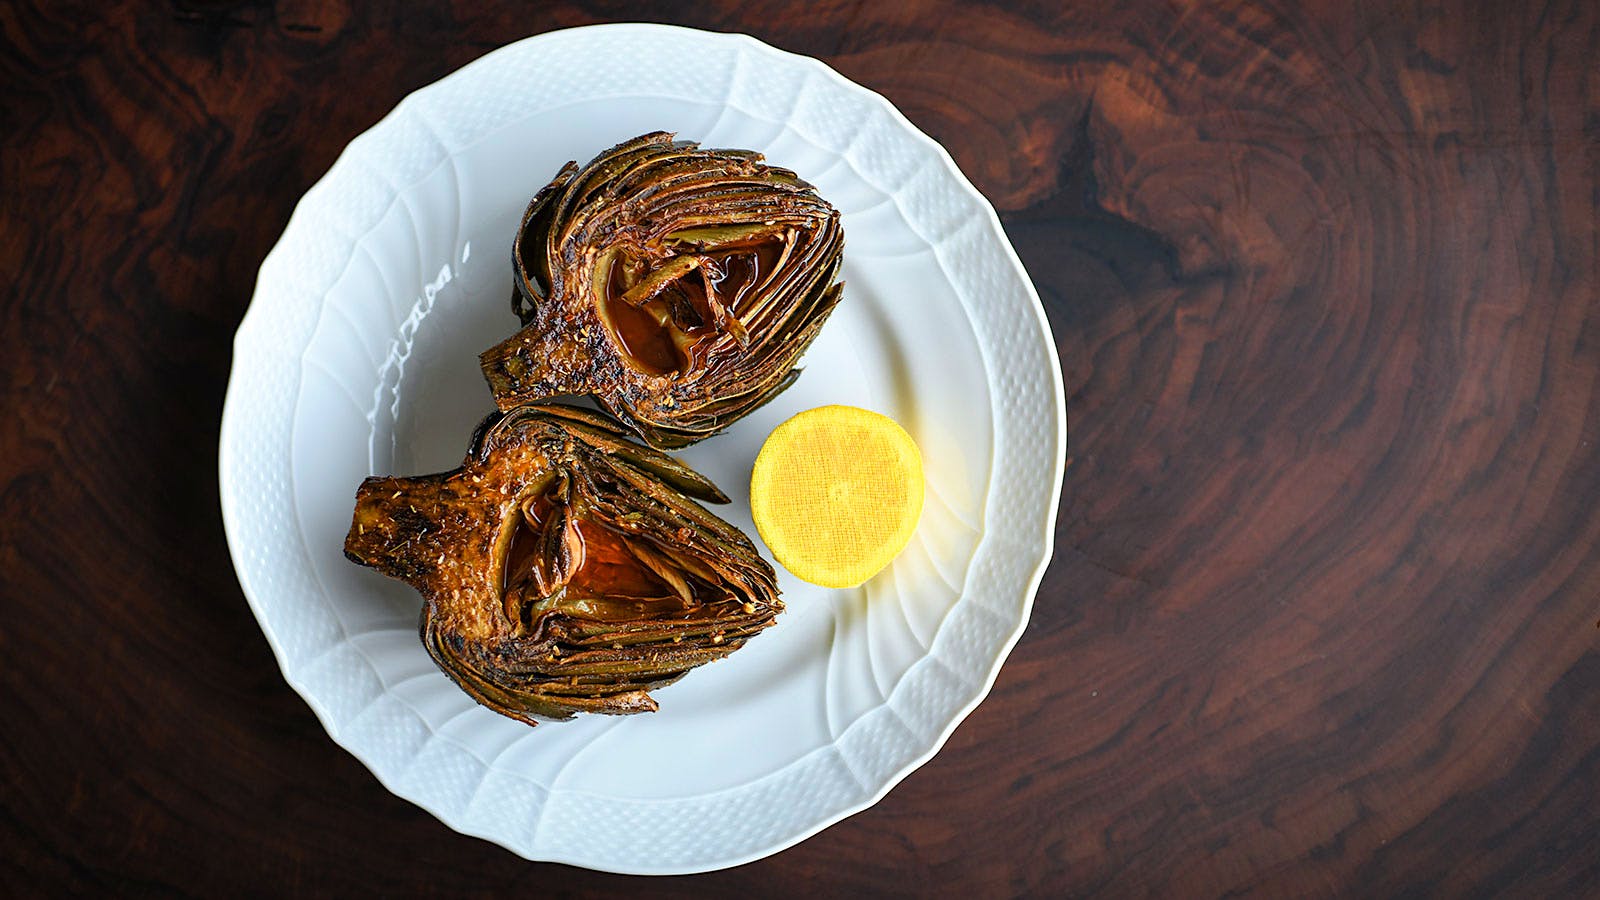 Steamed whole artichoke with thistle spices